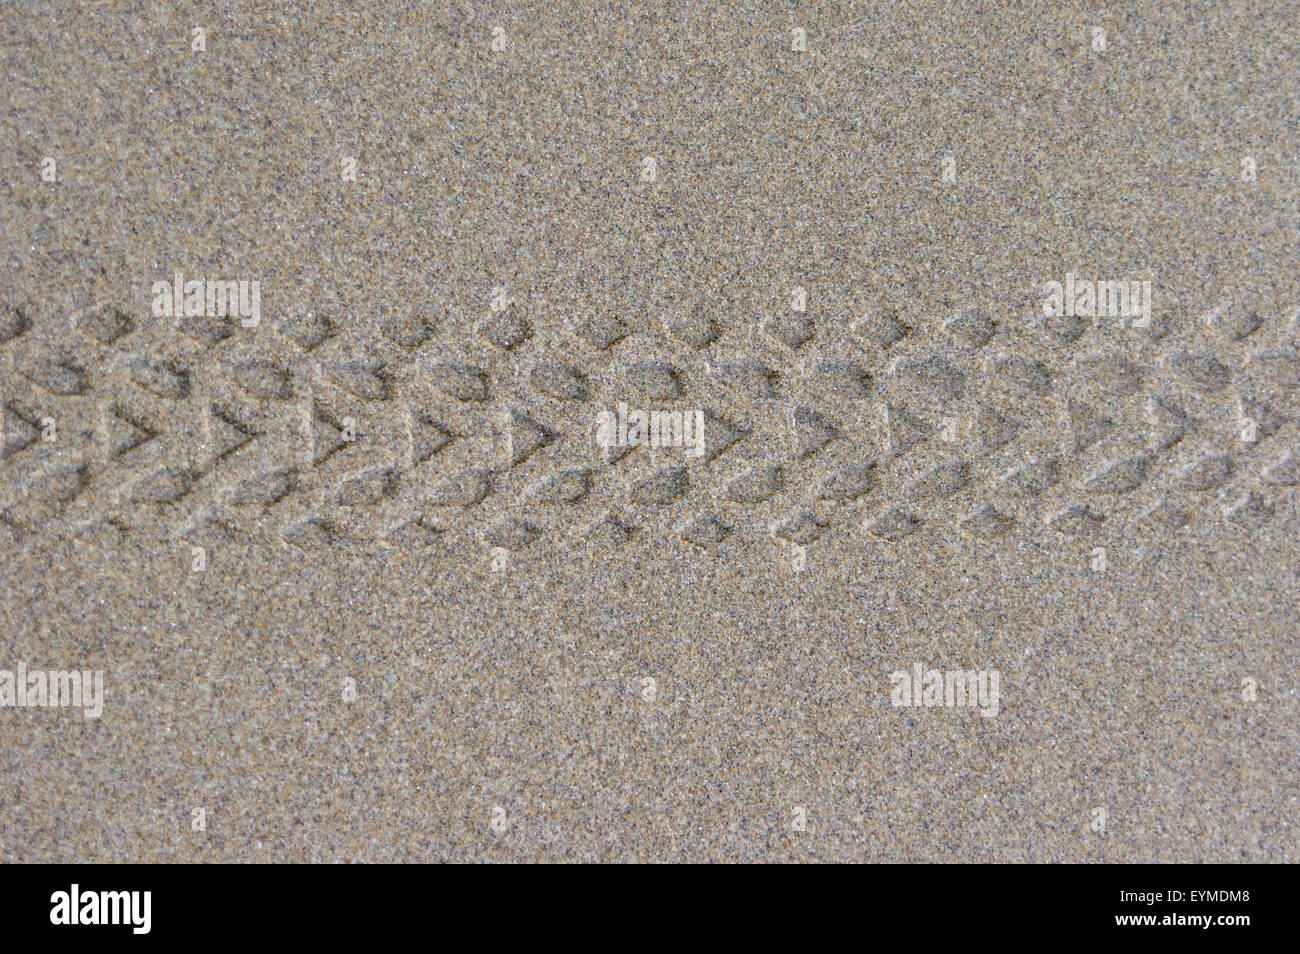 Bicycle tire tread marks in wet sand at the beach Stock Photo